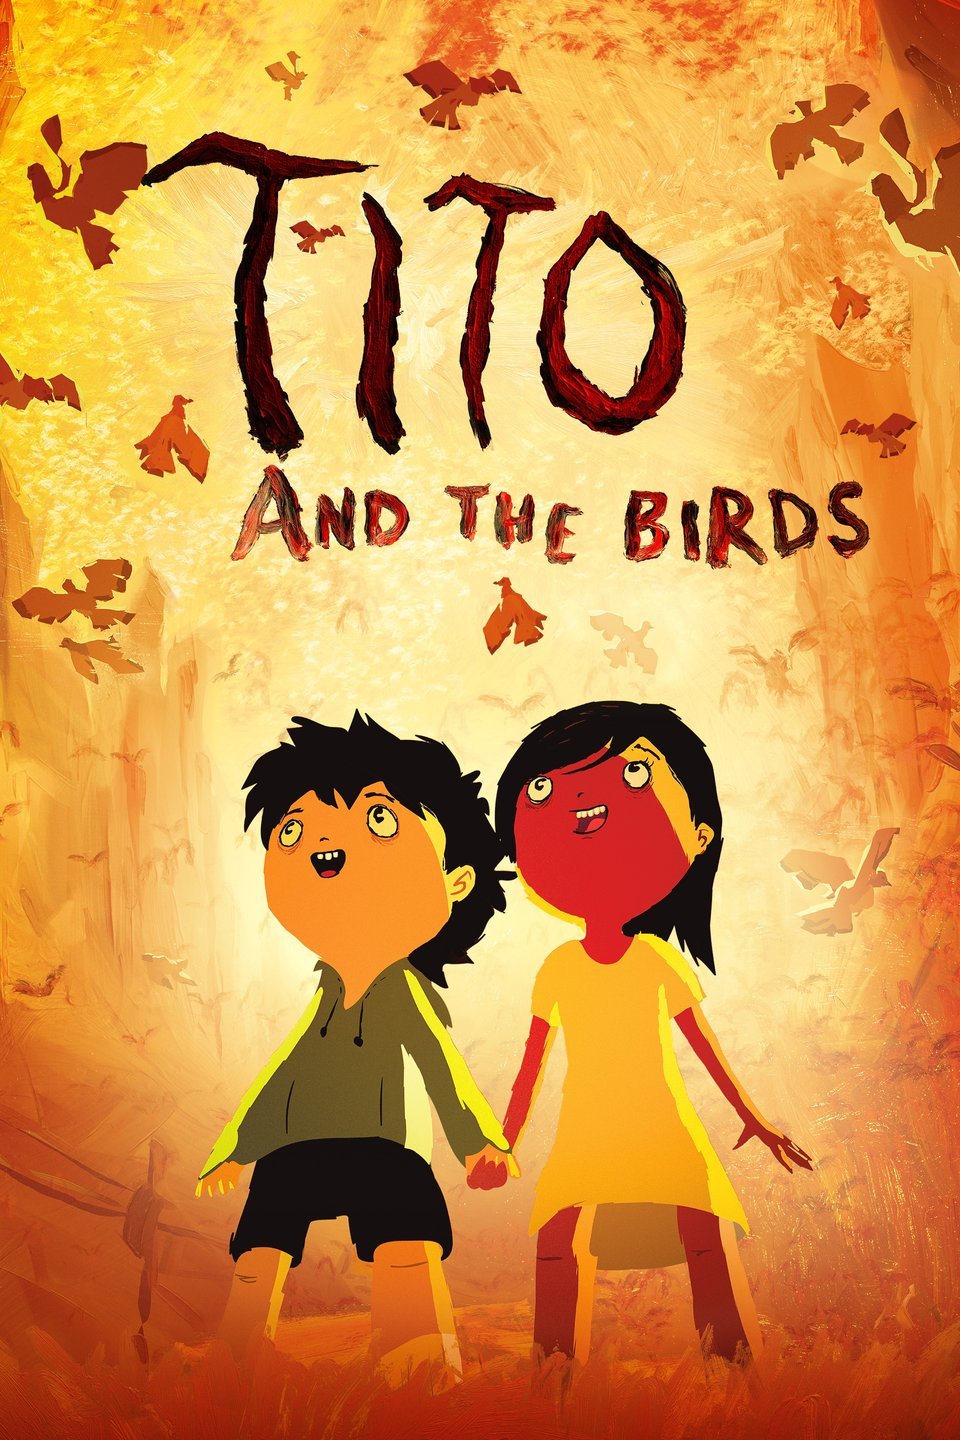 Tito and the Birds – Deserves To Be Seen By Anyone Who Appreciates The Medium Of Animation